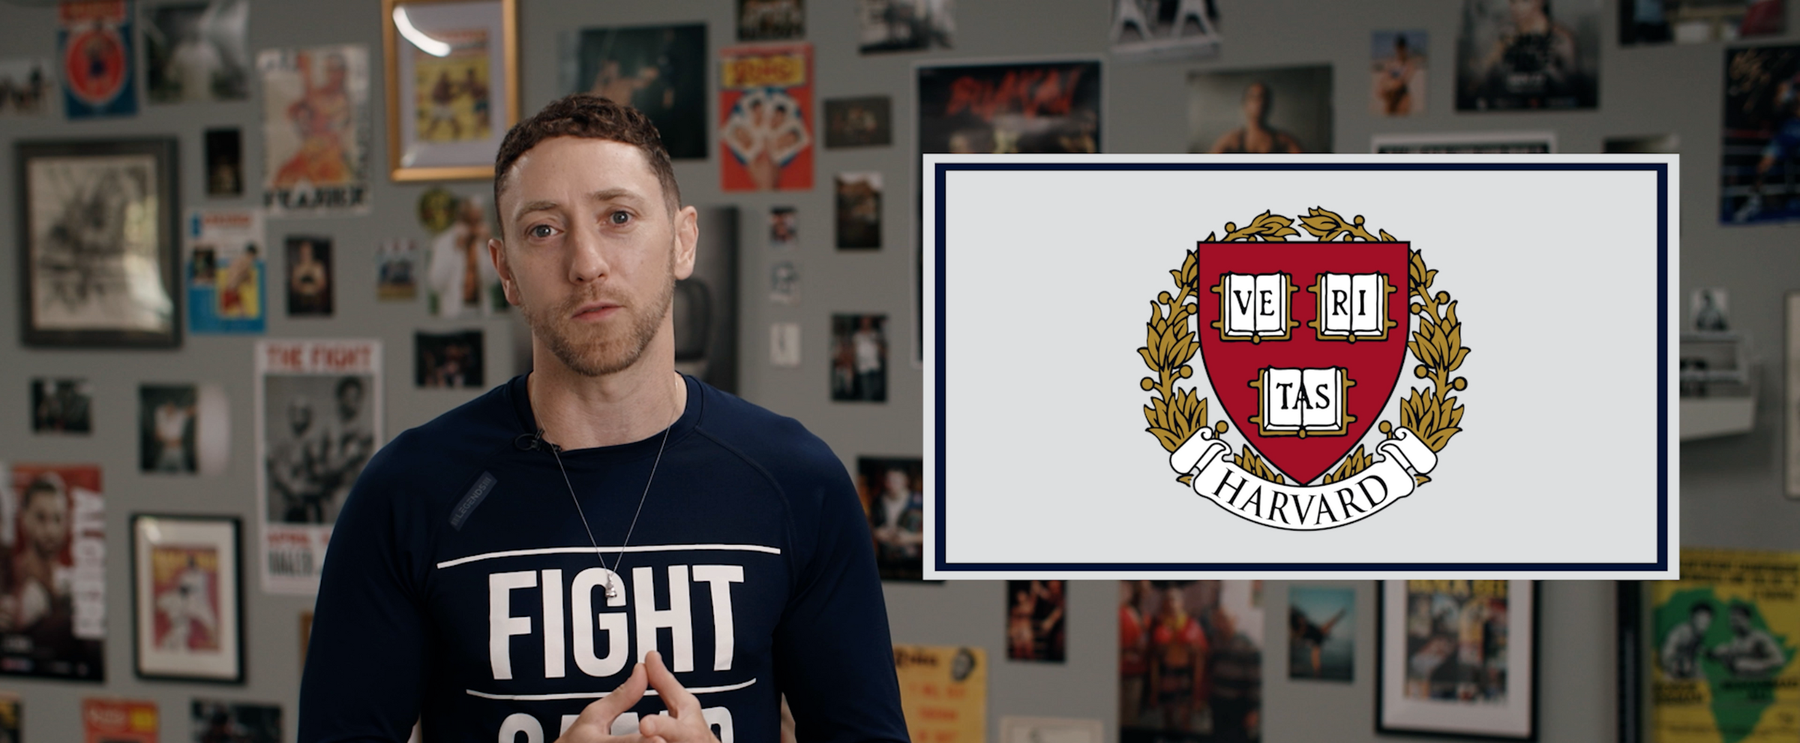 FightCamp - History of the Harvard Boxing Team